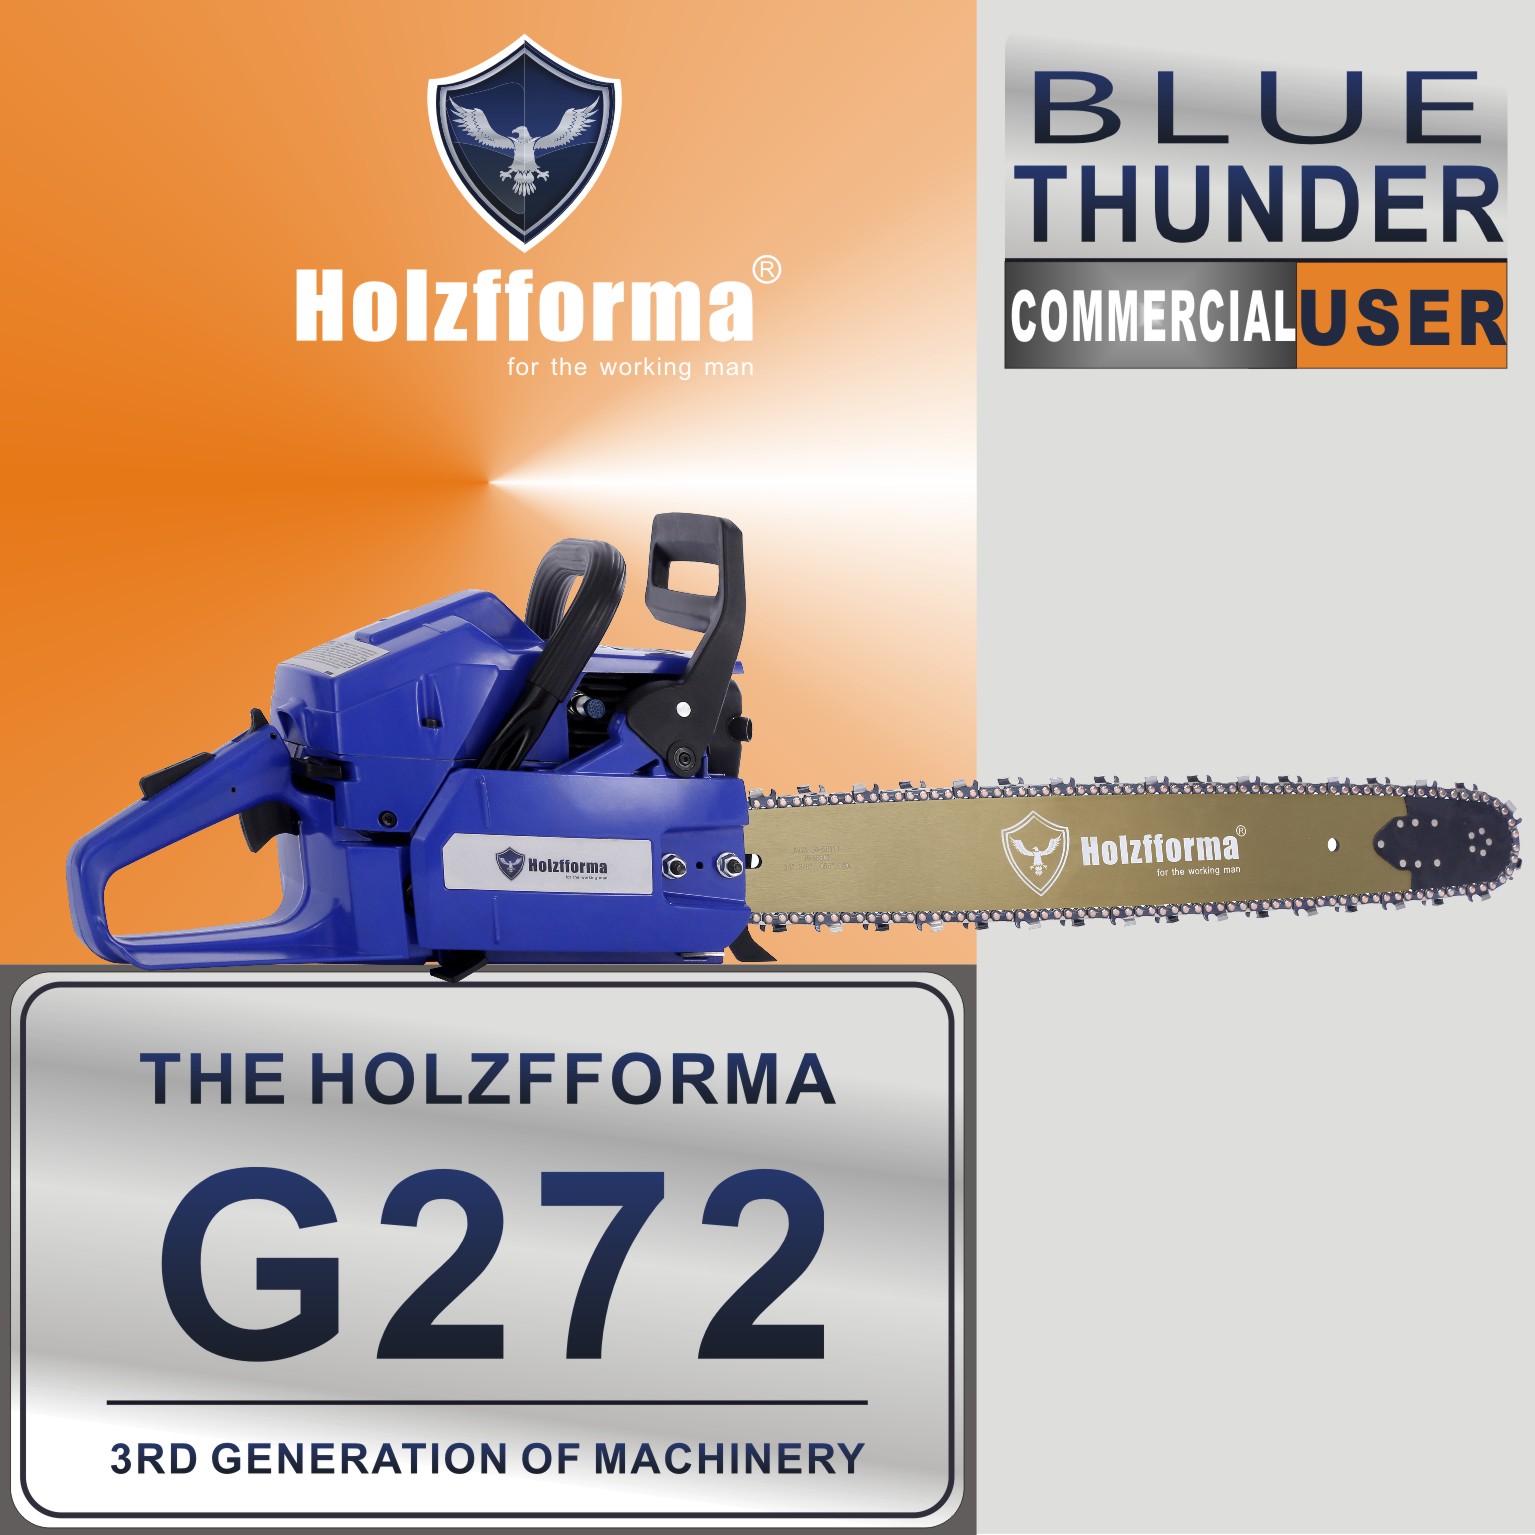 US STOCK - 72cc Holzfforma® G272 Gasoline Chain Saw Power Head With Genuine Walbro Carburetor and Ignition Coil Without Guide Bar and Chain By Farmertec All Parts Are For HUSQ 61 268 272 XP Chainsaw 2-4 Days Delivery Time Fast Shipping For US Customers Only